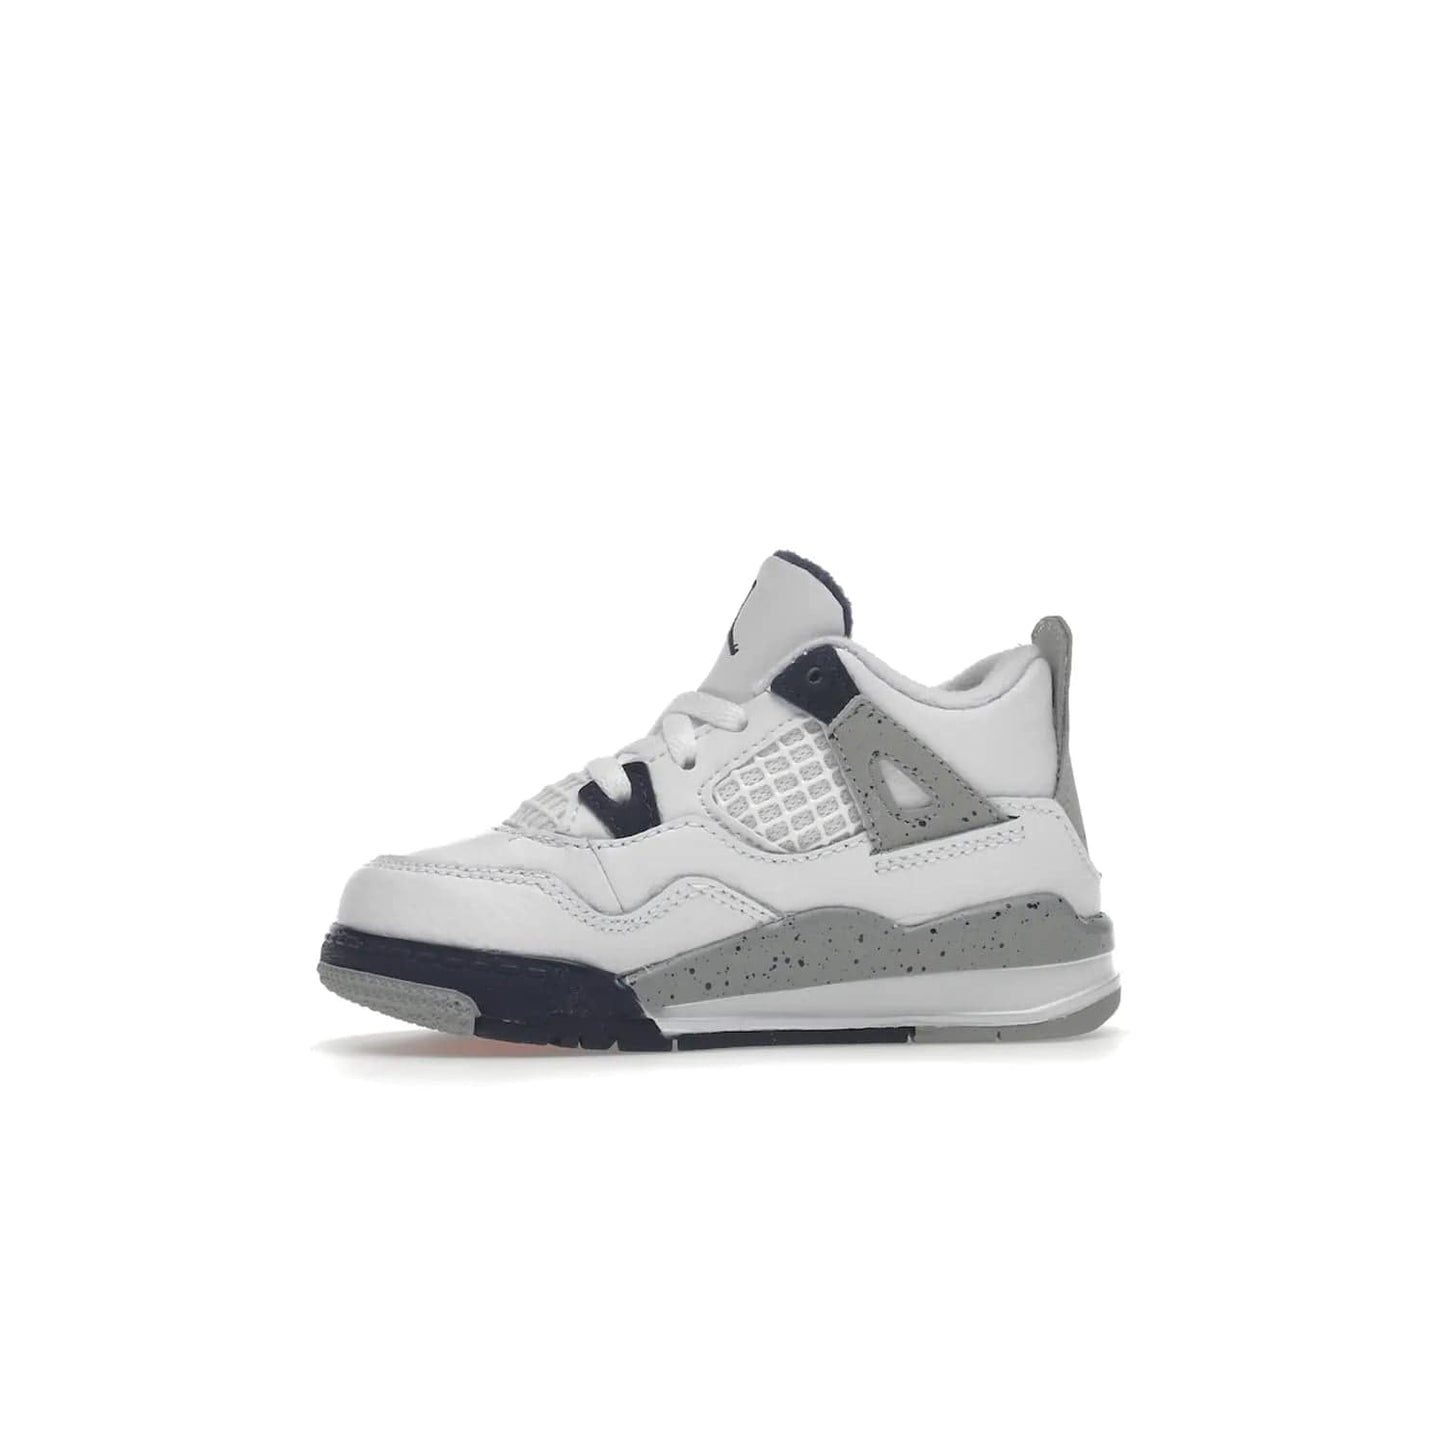 Jordan 4 Retro Midnight Navy (TD) - Image 18 - Only at www.BallersClubKickz.com - Introducing the Jordan 4 Retro Midnight Navy (TD) for kids. White leather upper with navy and grey accents plus fire red detailing. Perfect for everyday wear. Get yours before they sell out.